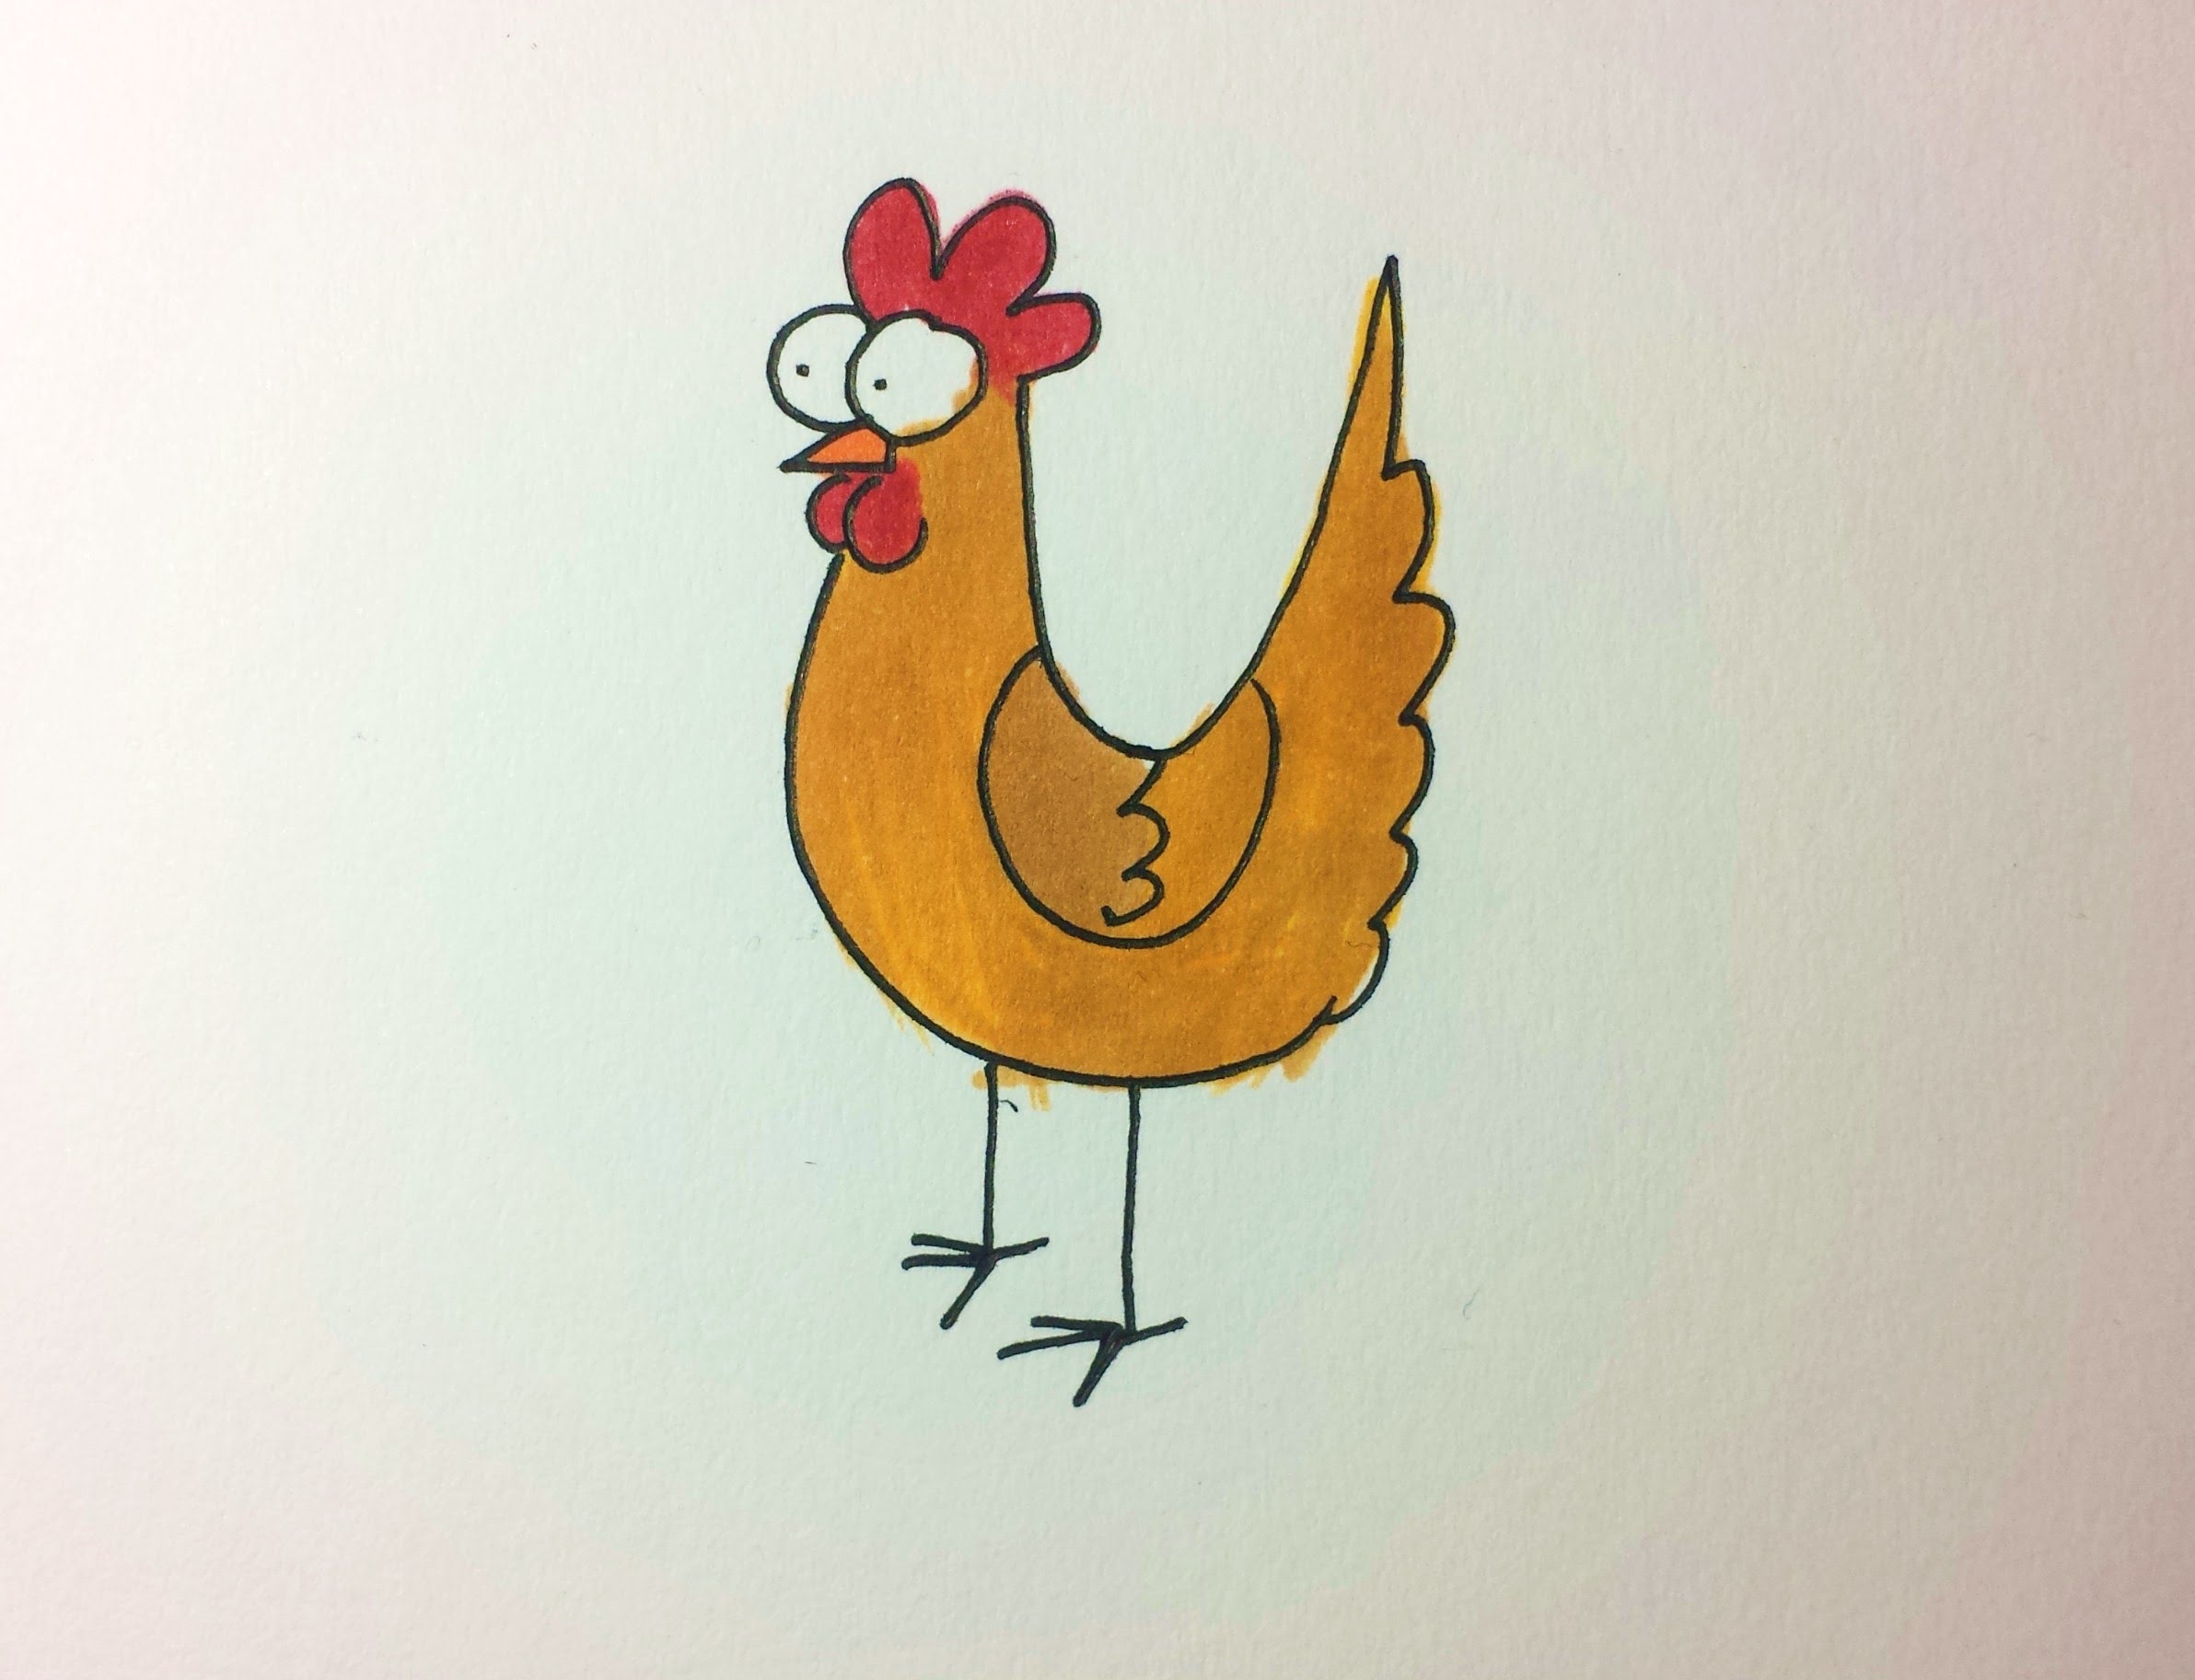 How to Draw a Cartoon Chicken - YouTube